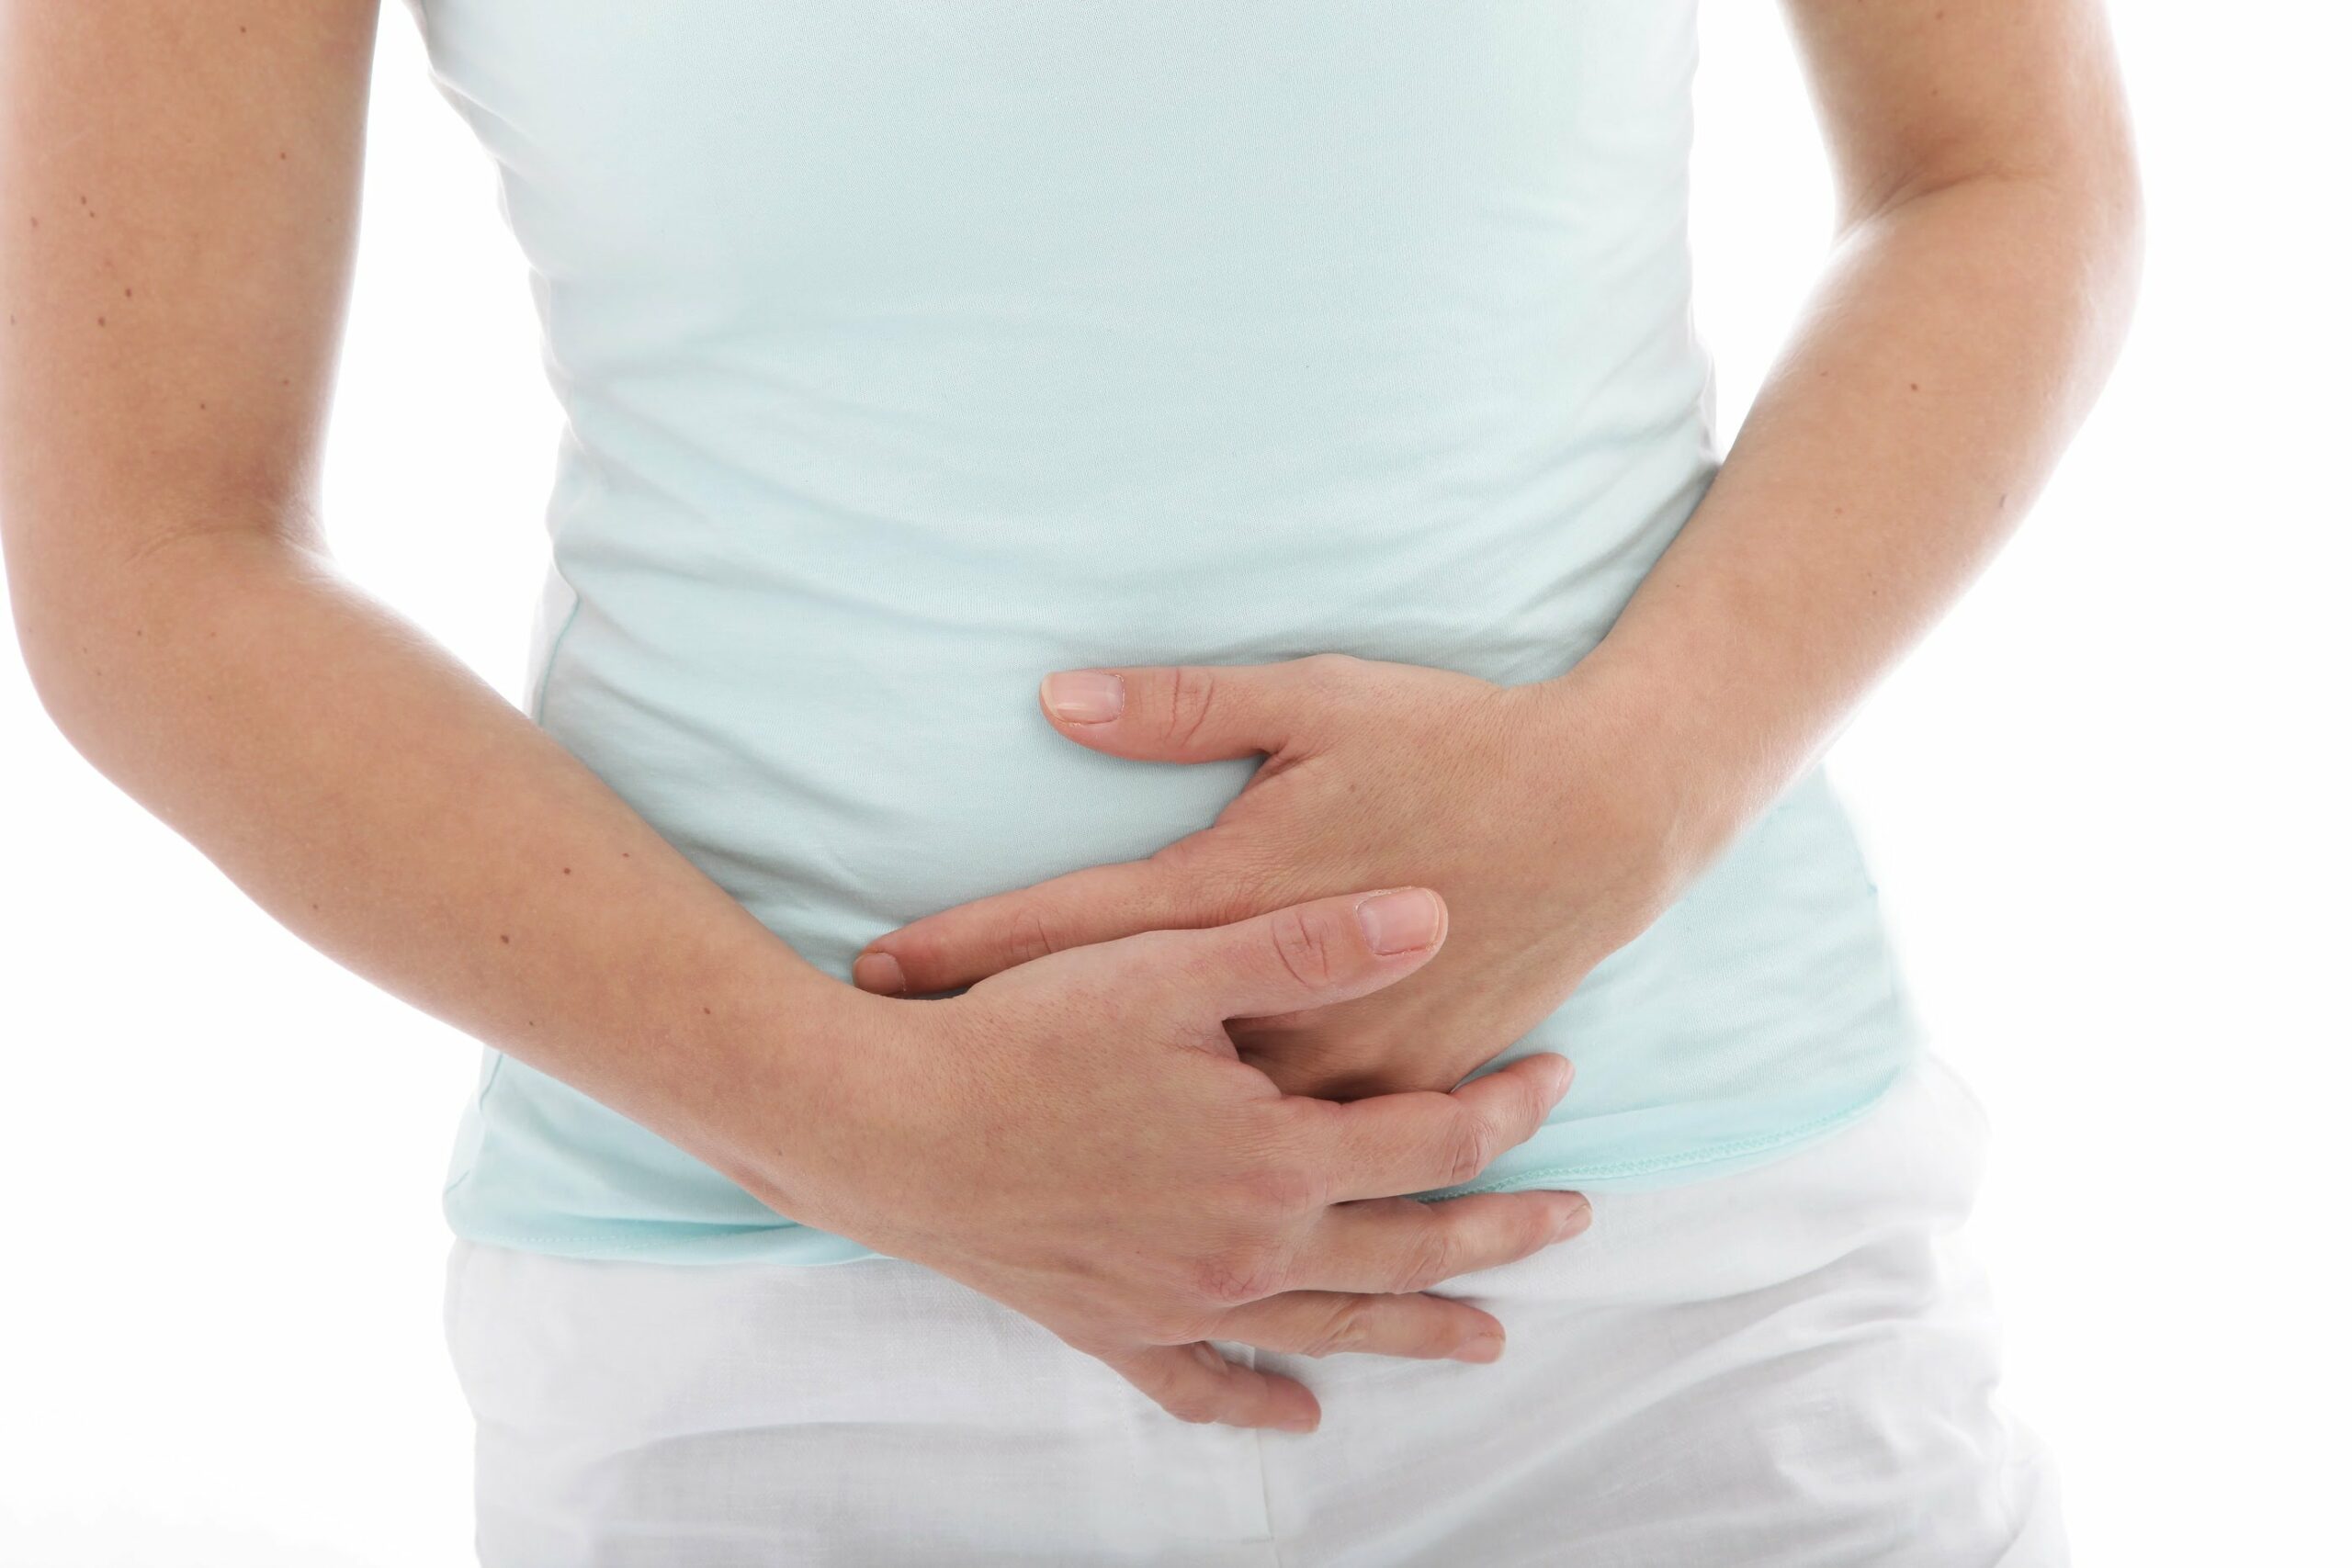 The First Noticeable Symptom of Bowel Cancer That Targets Most People